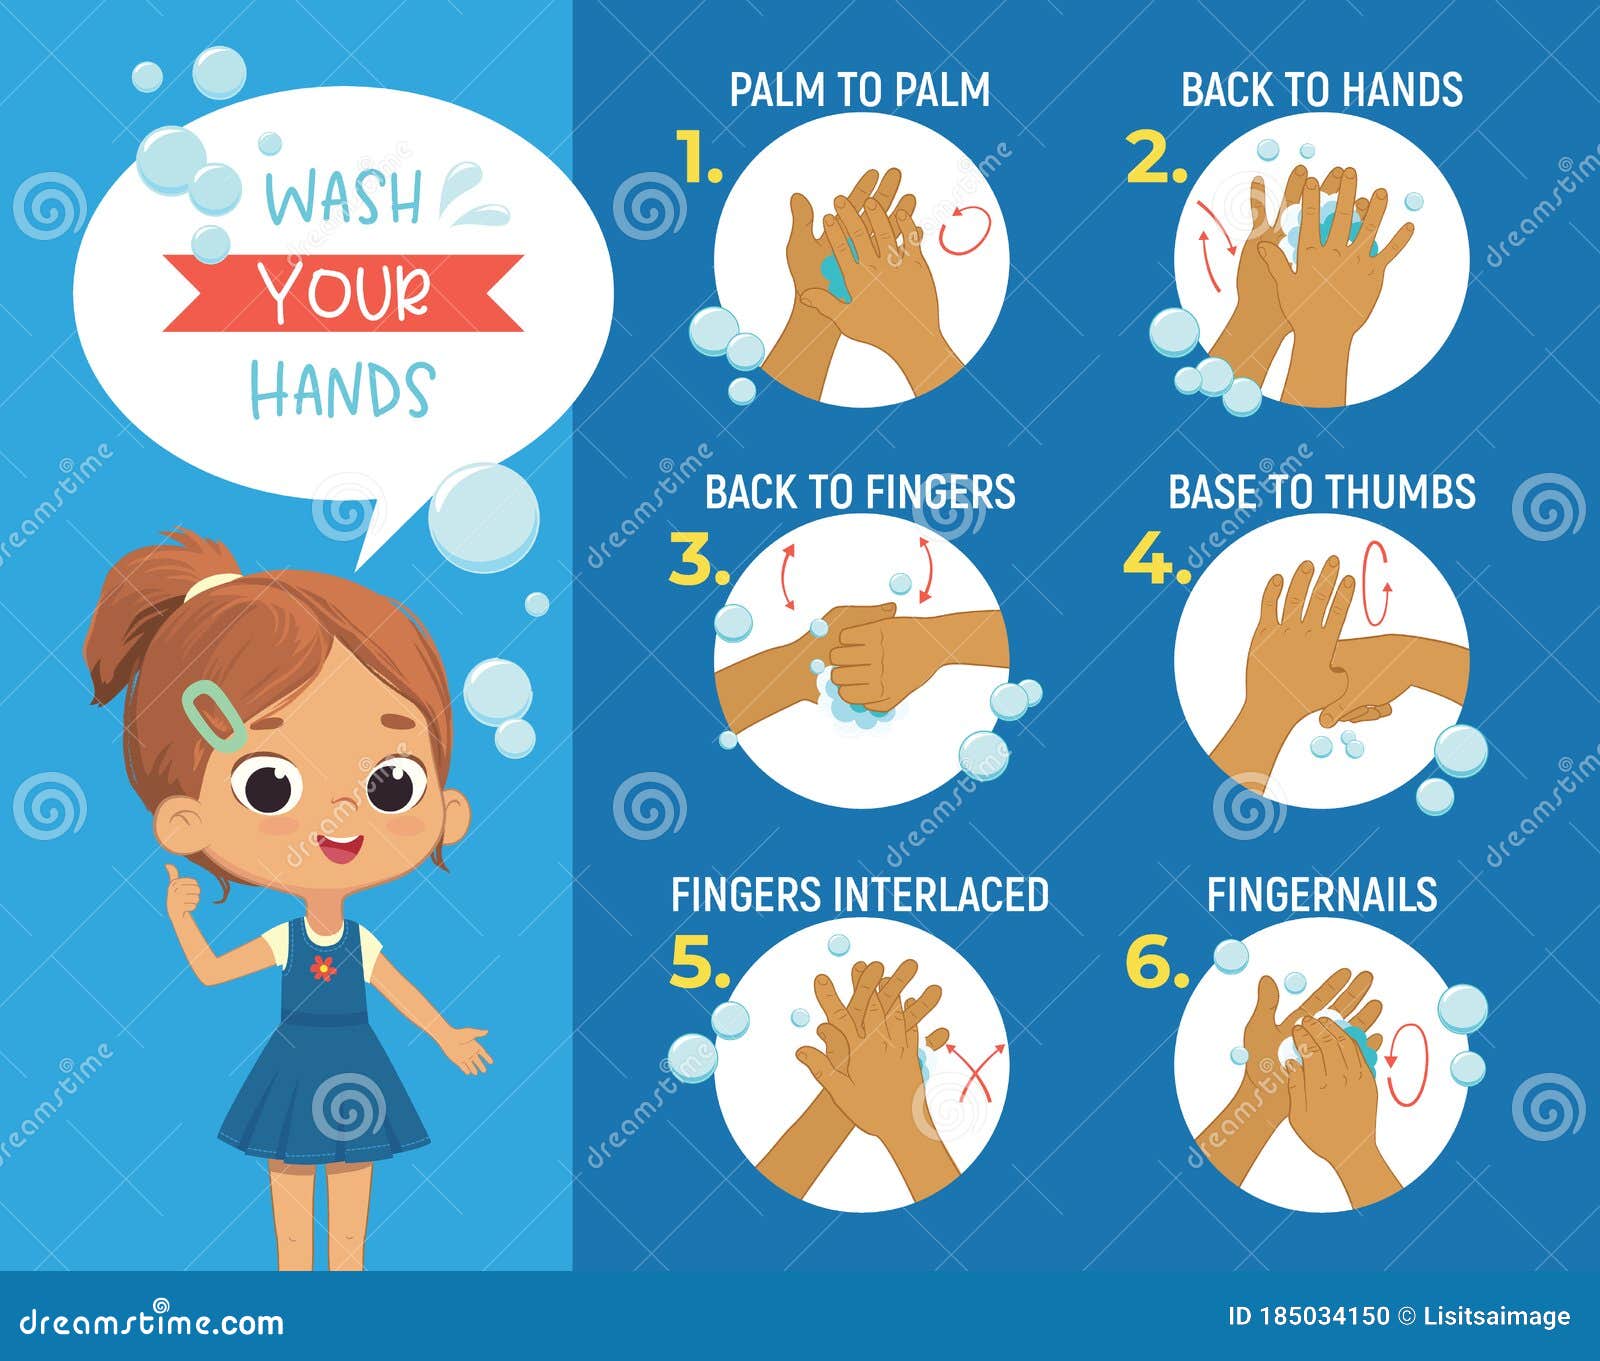 How To Wash Your Hands Step Poster Infographic Illustration. Poster